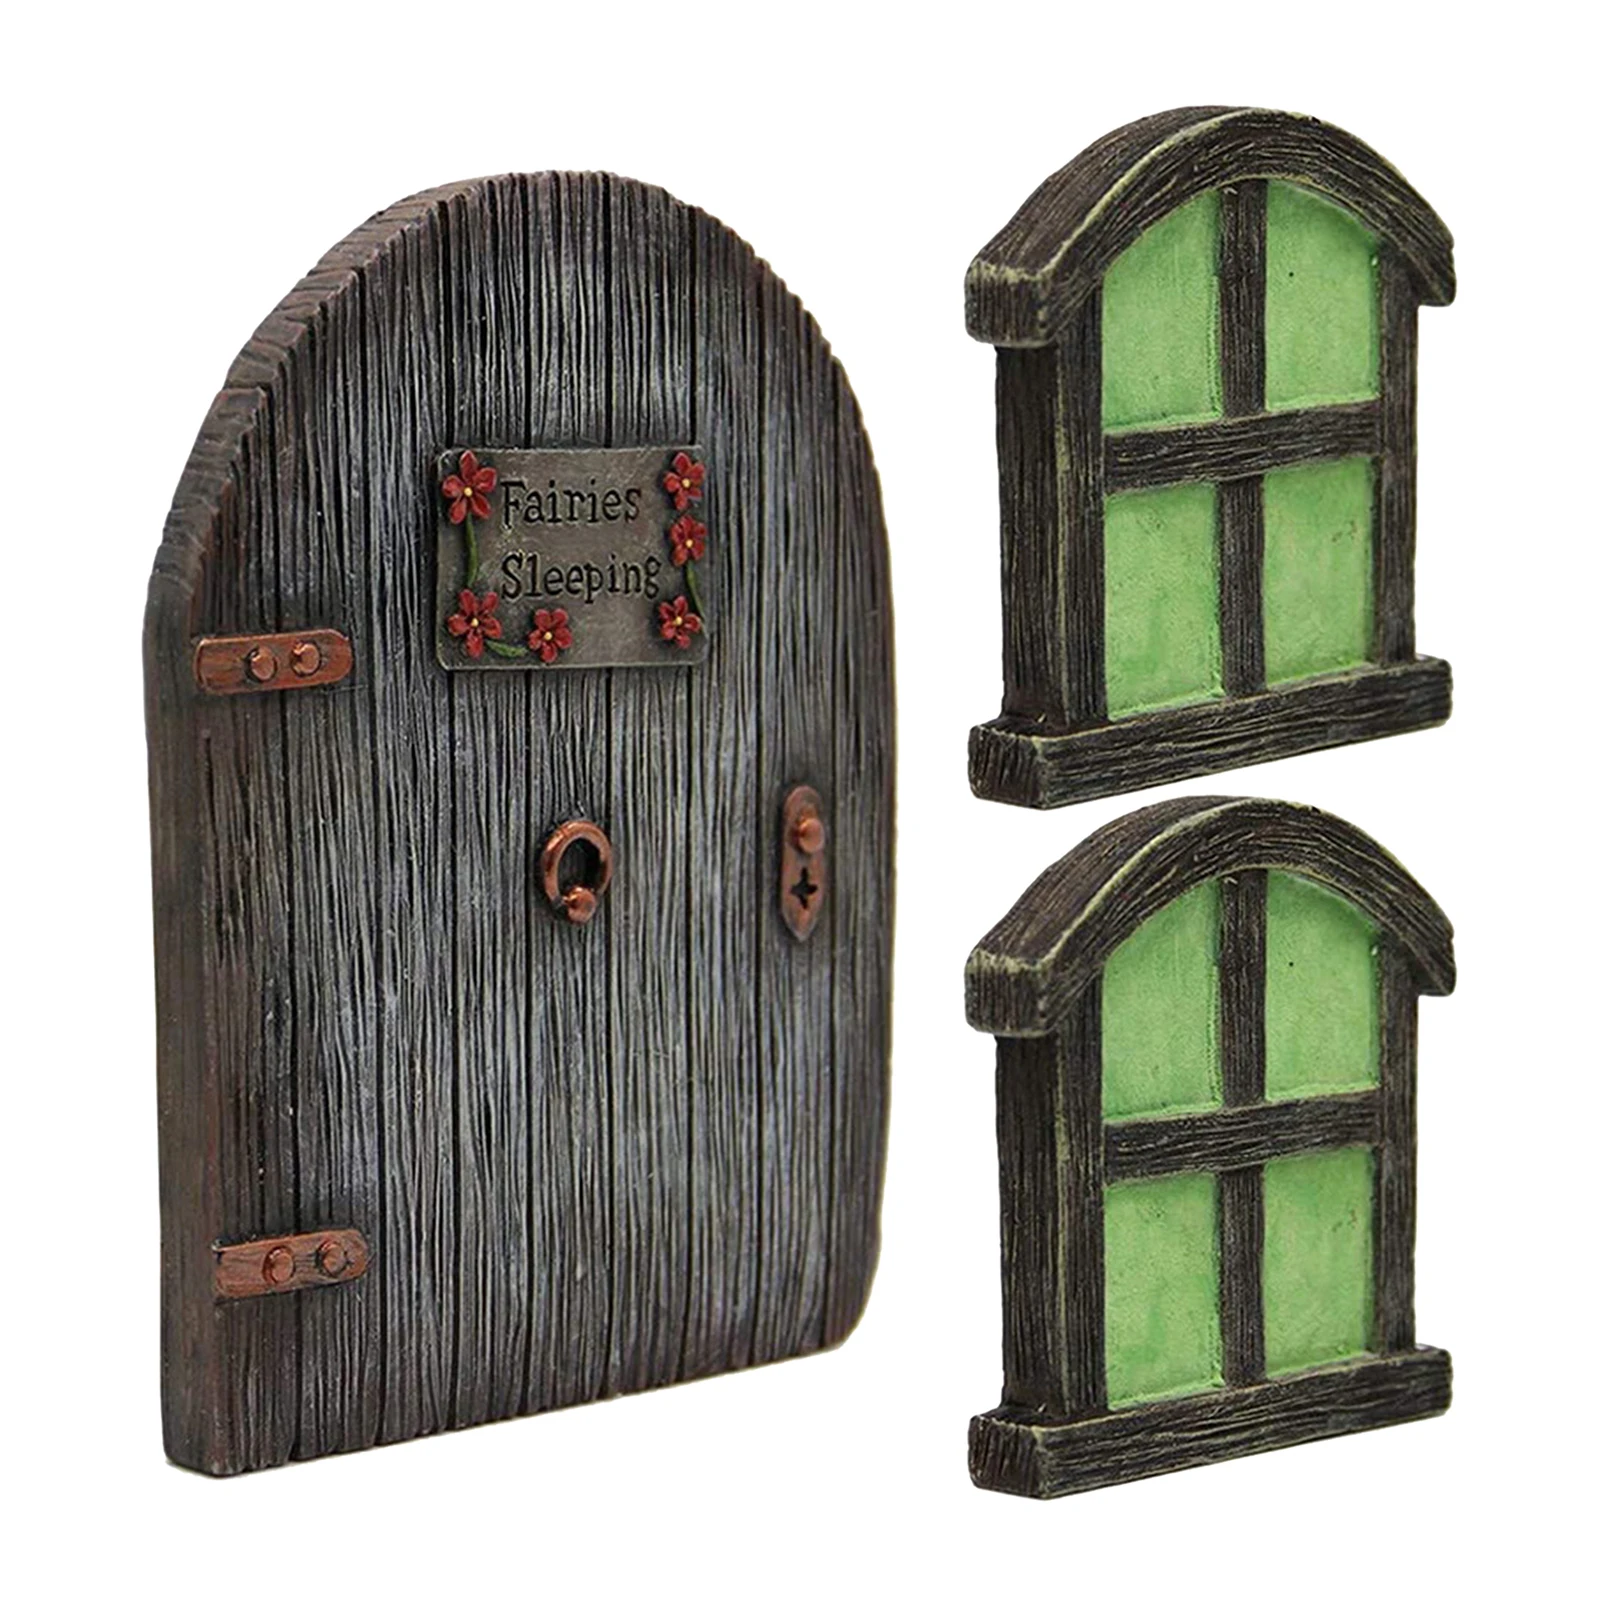 vhshppy Miniature Gnome Fairy House Window Door for Trees Outdoor Tree Decoration Garden Accessories Mini Fairy Garden Sculpture Lawn Ornament Decor 1pc A-1, One Size 